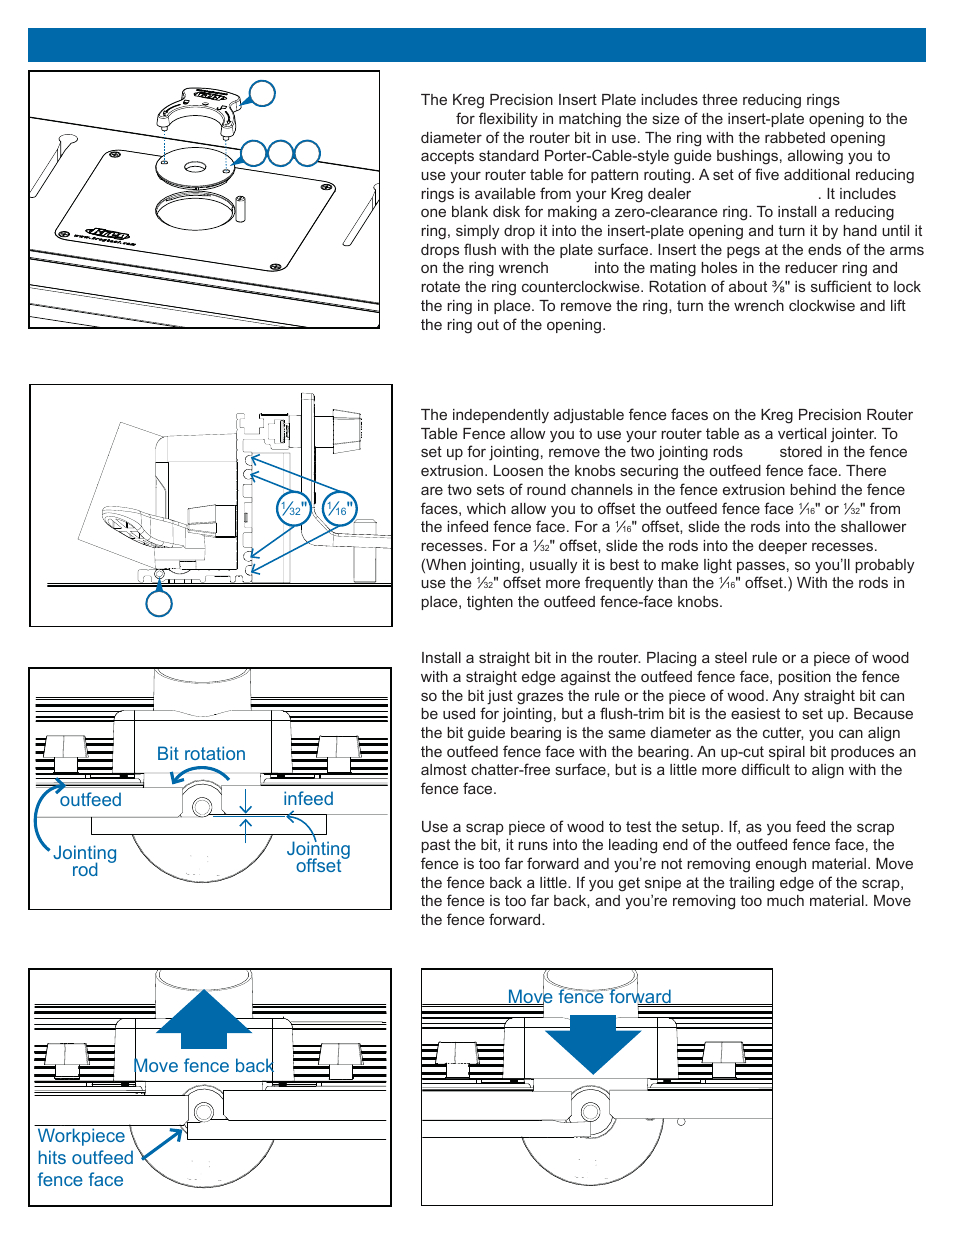 Using your router table, Reducing rings, Jointing | Kreg PRS2100 Precision Benchtop Router Table User Manual | Page 9 / 28